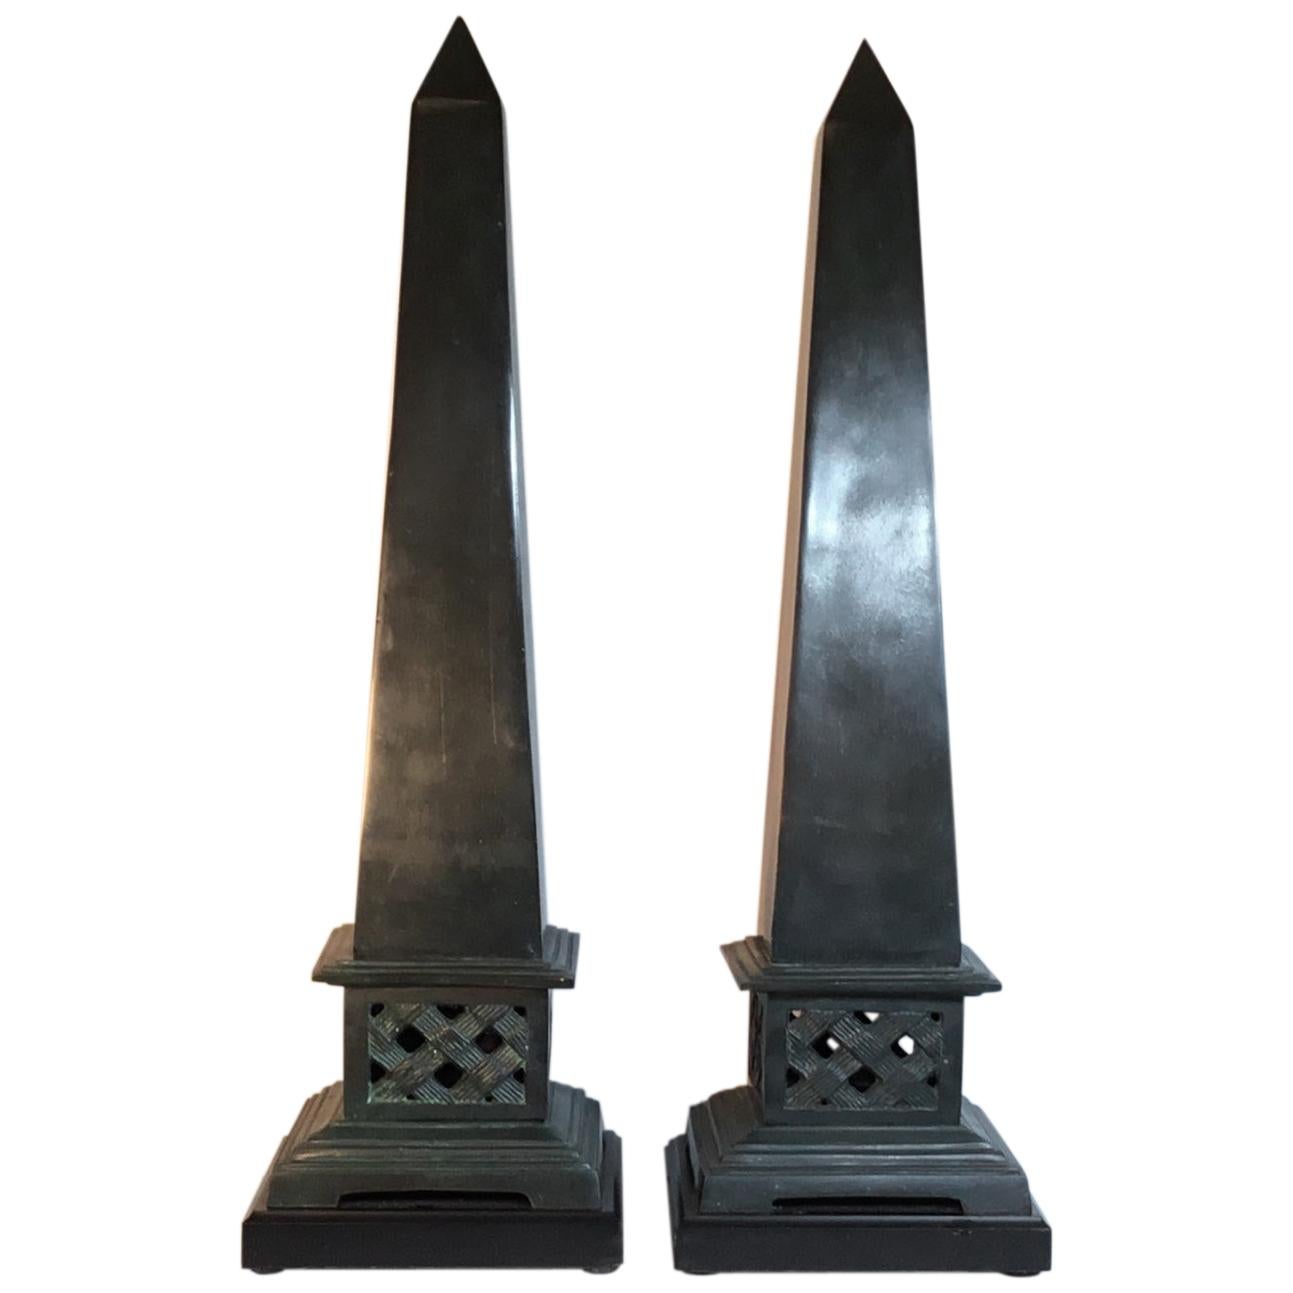 Pair of Neoclassical Style Solid Bronze Obelisk